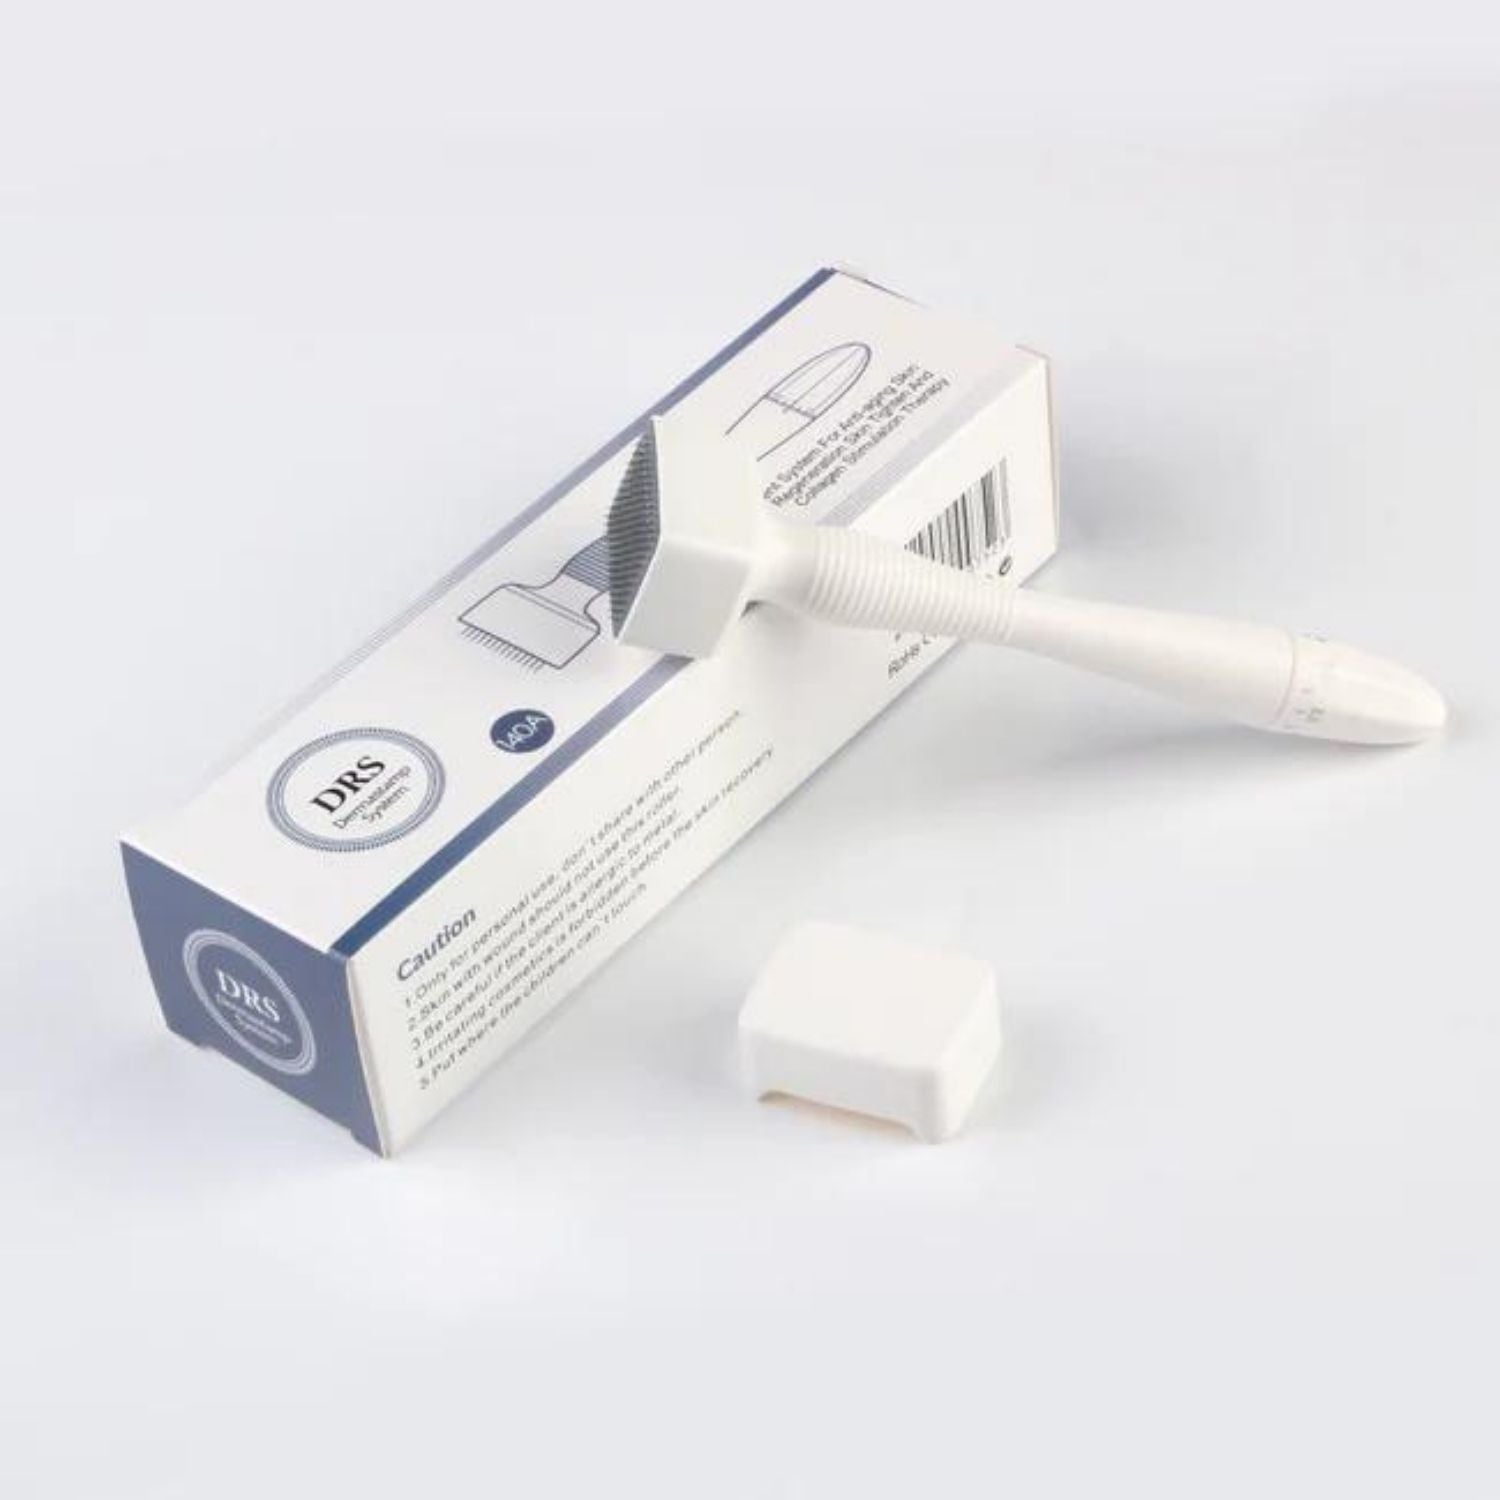 Derma Stamp Micro Needling Skin Tool - Dr. Pen Store - Dr. Pen Buy Genuine Dr Pen Products with Trust